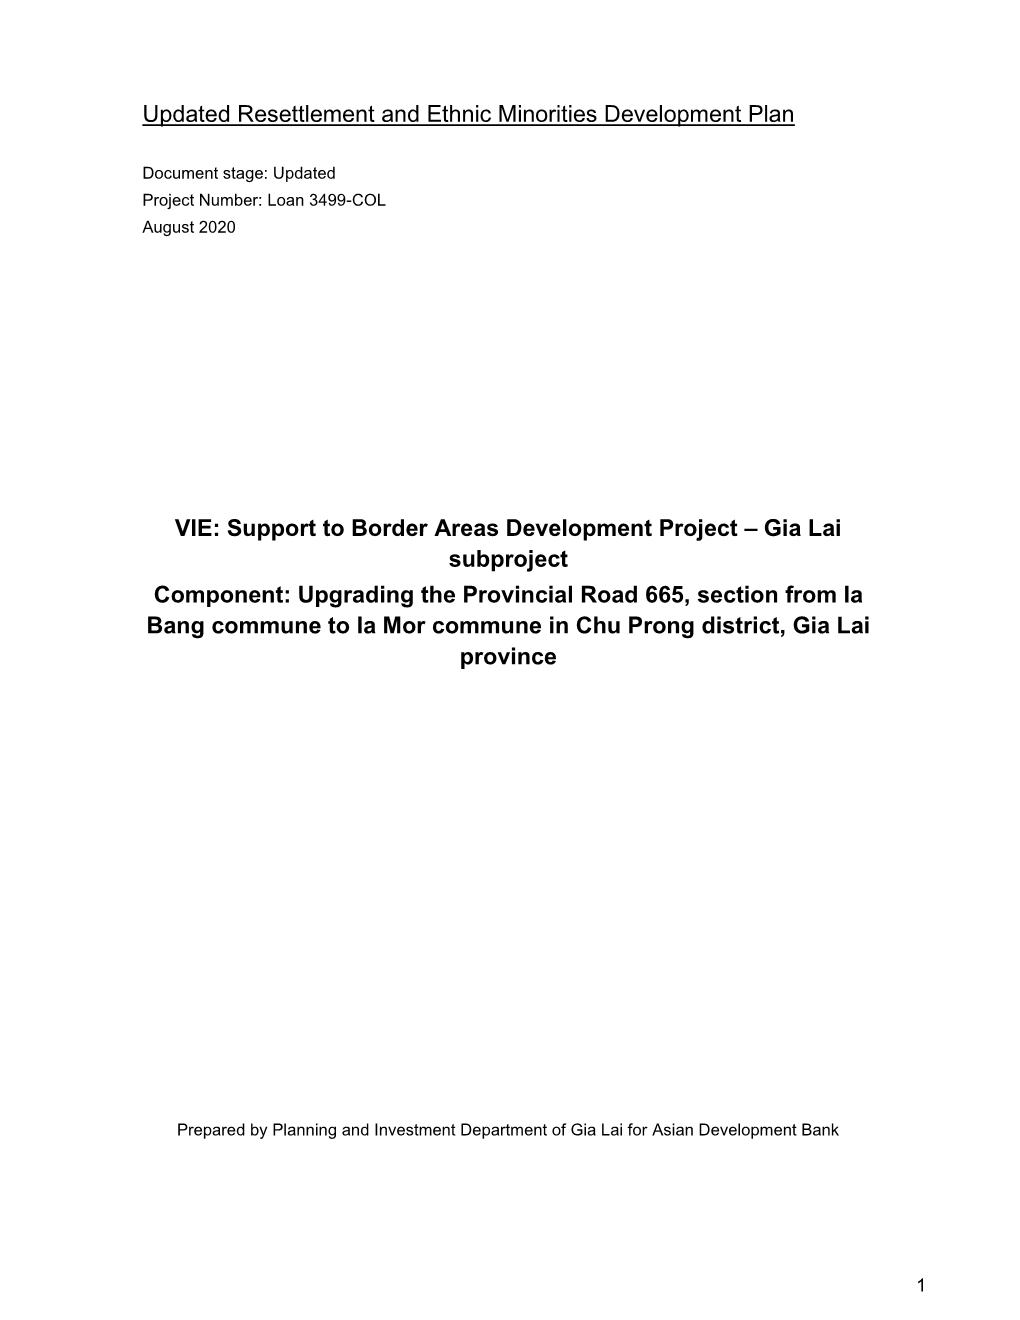 Gia Lai Subproject Component: Upgrading the Provincial Road 665, Section from Ia Bang Commune to Ia Mor Commune in Chu Prong District, Gia Lai Province